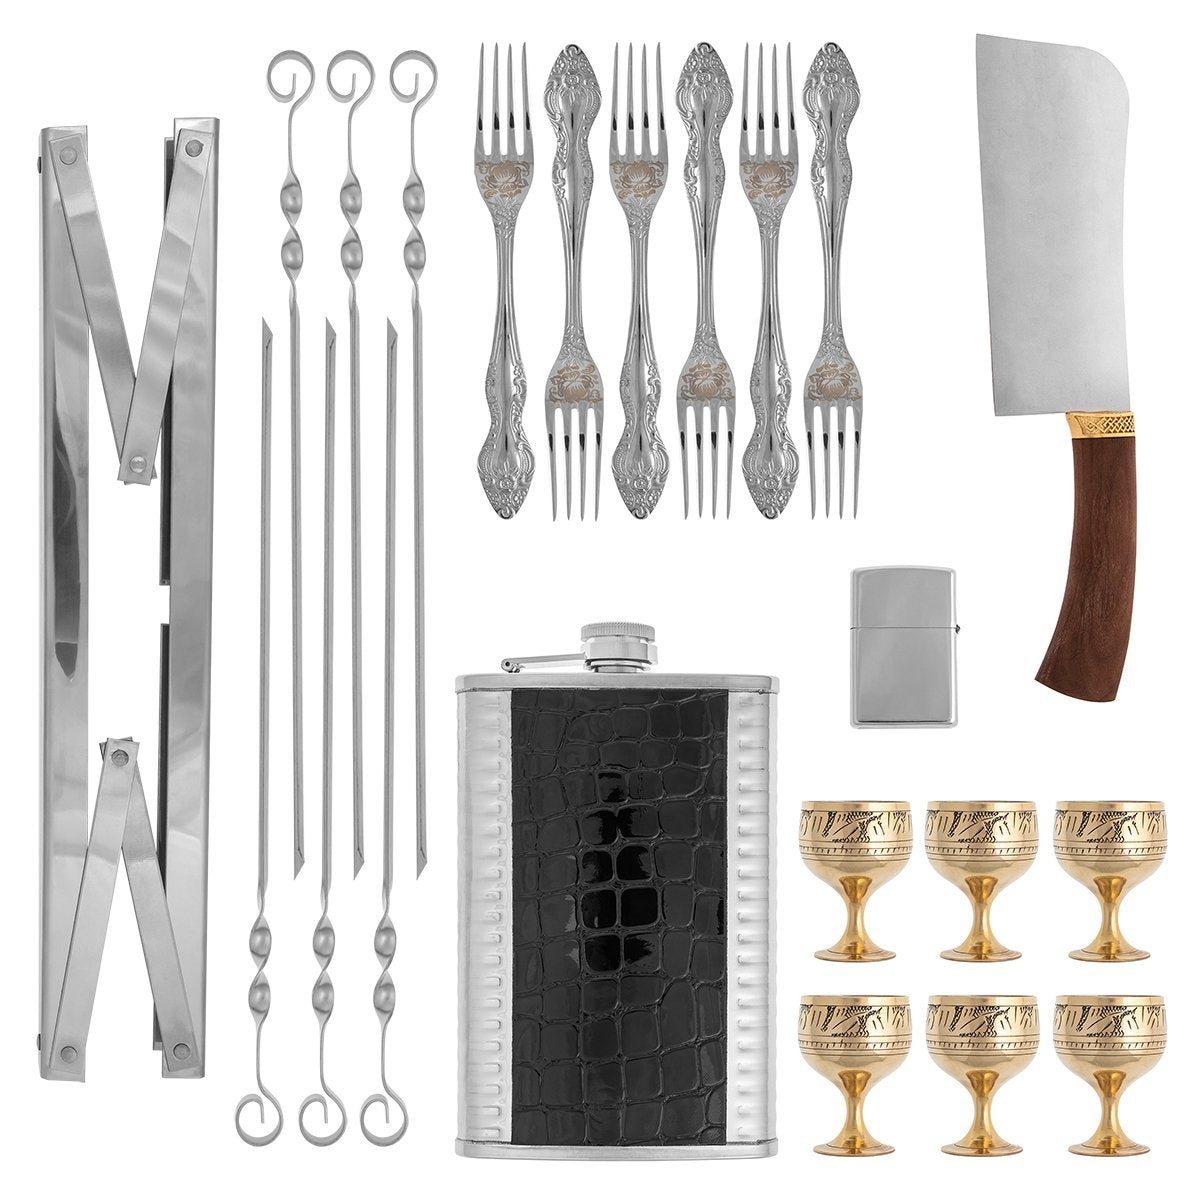 Exclusive Picnic/Barbecue Gift Set for 6-Persons With Hand-Crafted Knife